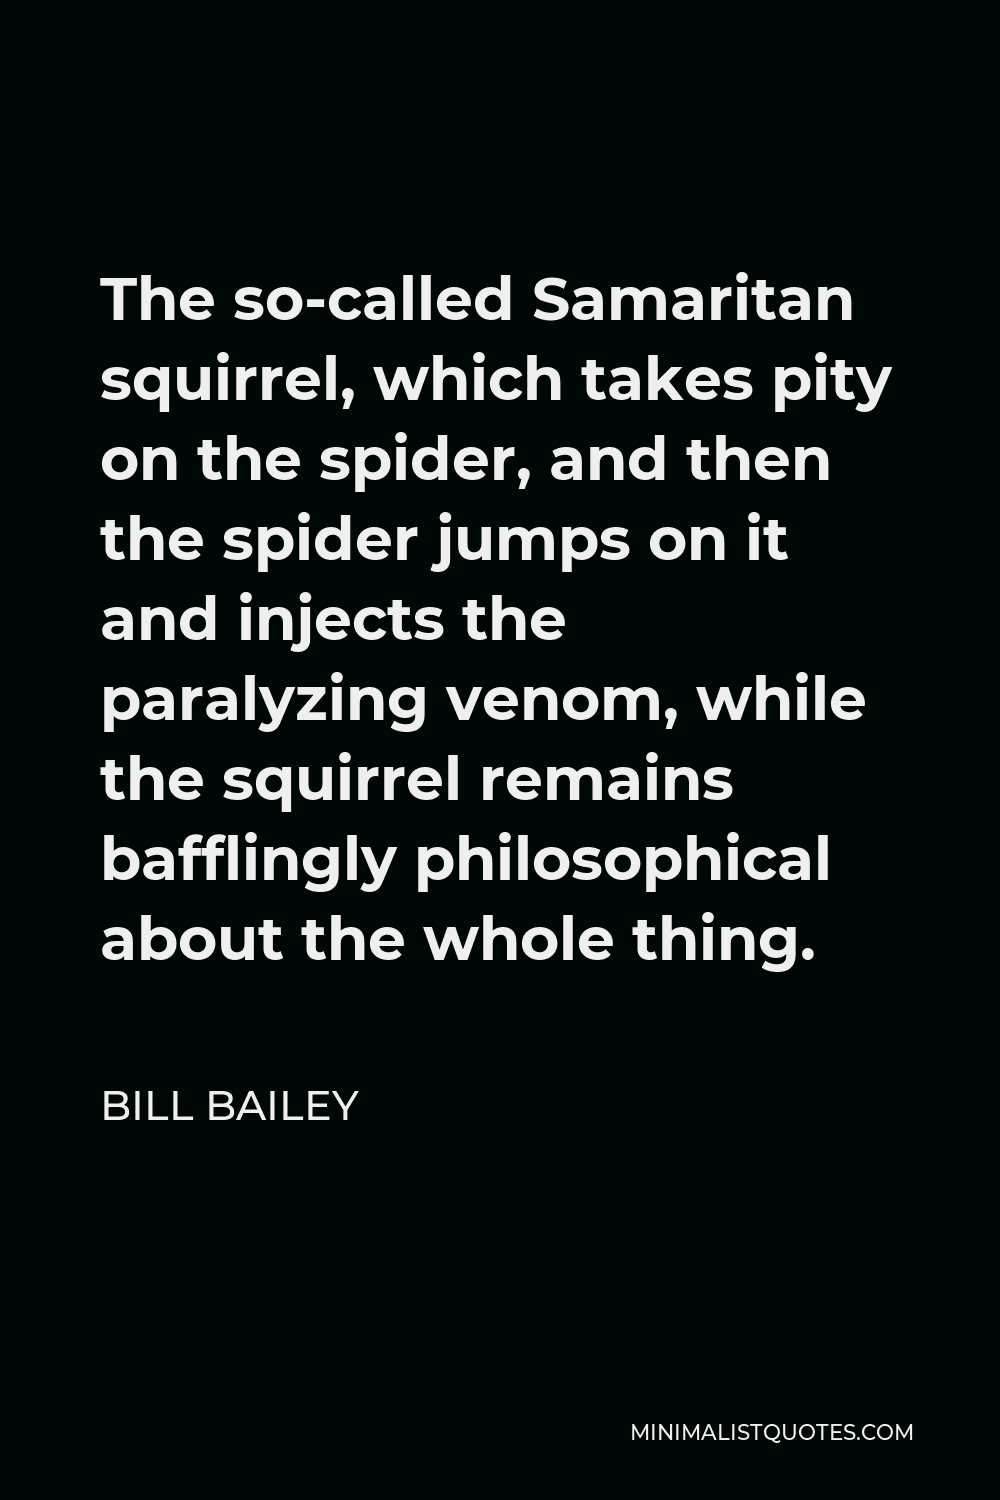 Bill Bailey Quote - The so-called Samaritan squirrel, which takes pity on the spider, and then the spider jumps on it and injects the paralyzing venom, while the squirrel remains bafflingly philosophical about the whole thing.